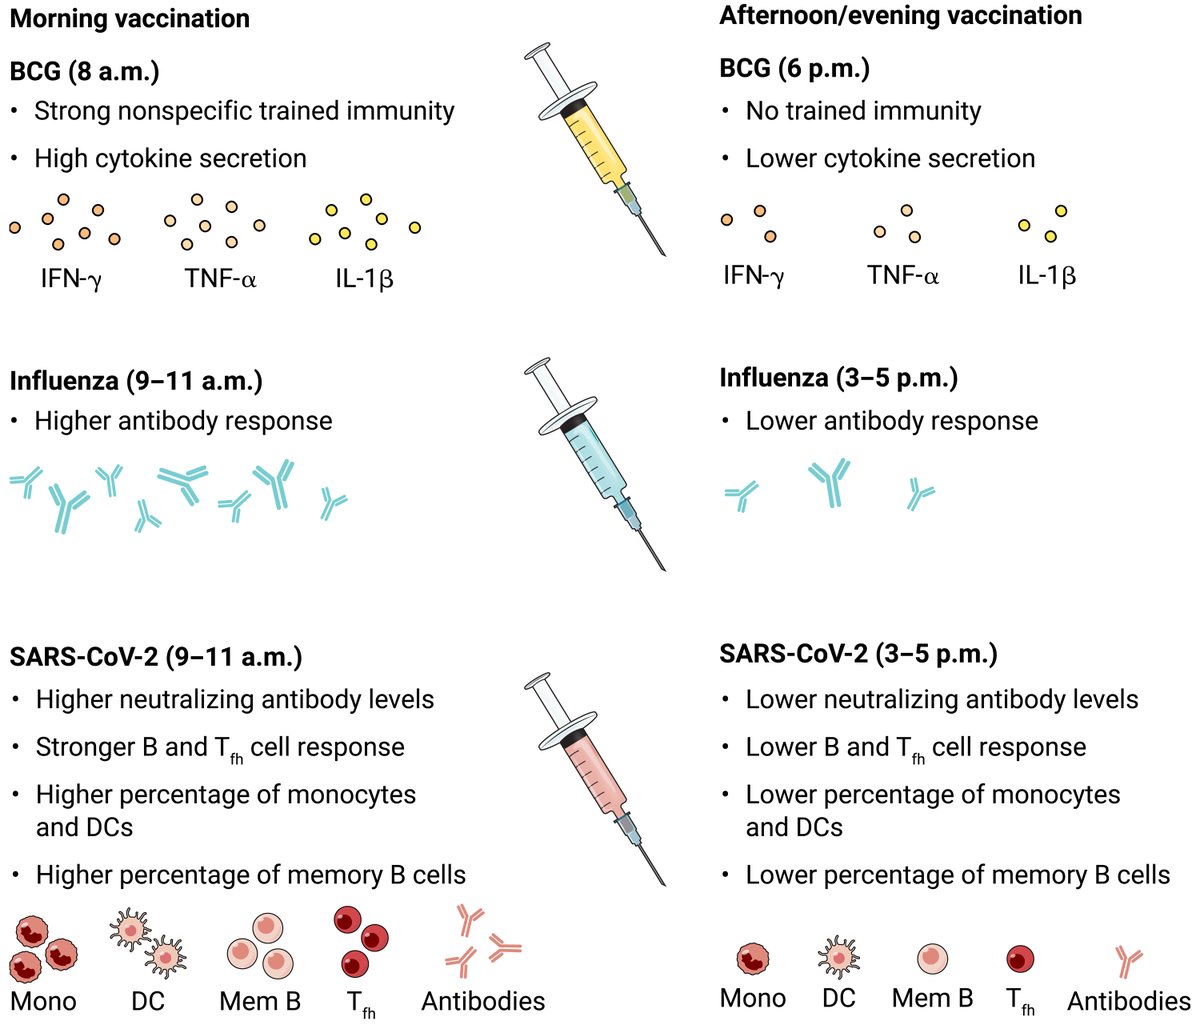 A 2022 @SciImmunology Review highlights the benefits of morning vaccination compared with afternoon/evening vaccination in humans. Learn more on #DayOfImmunology: scim.ag/6LH